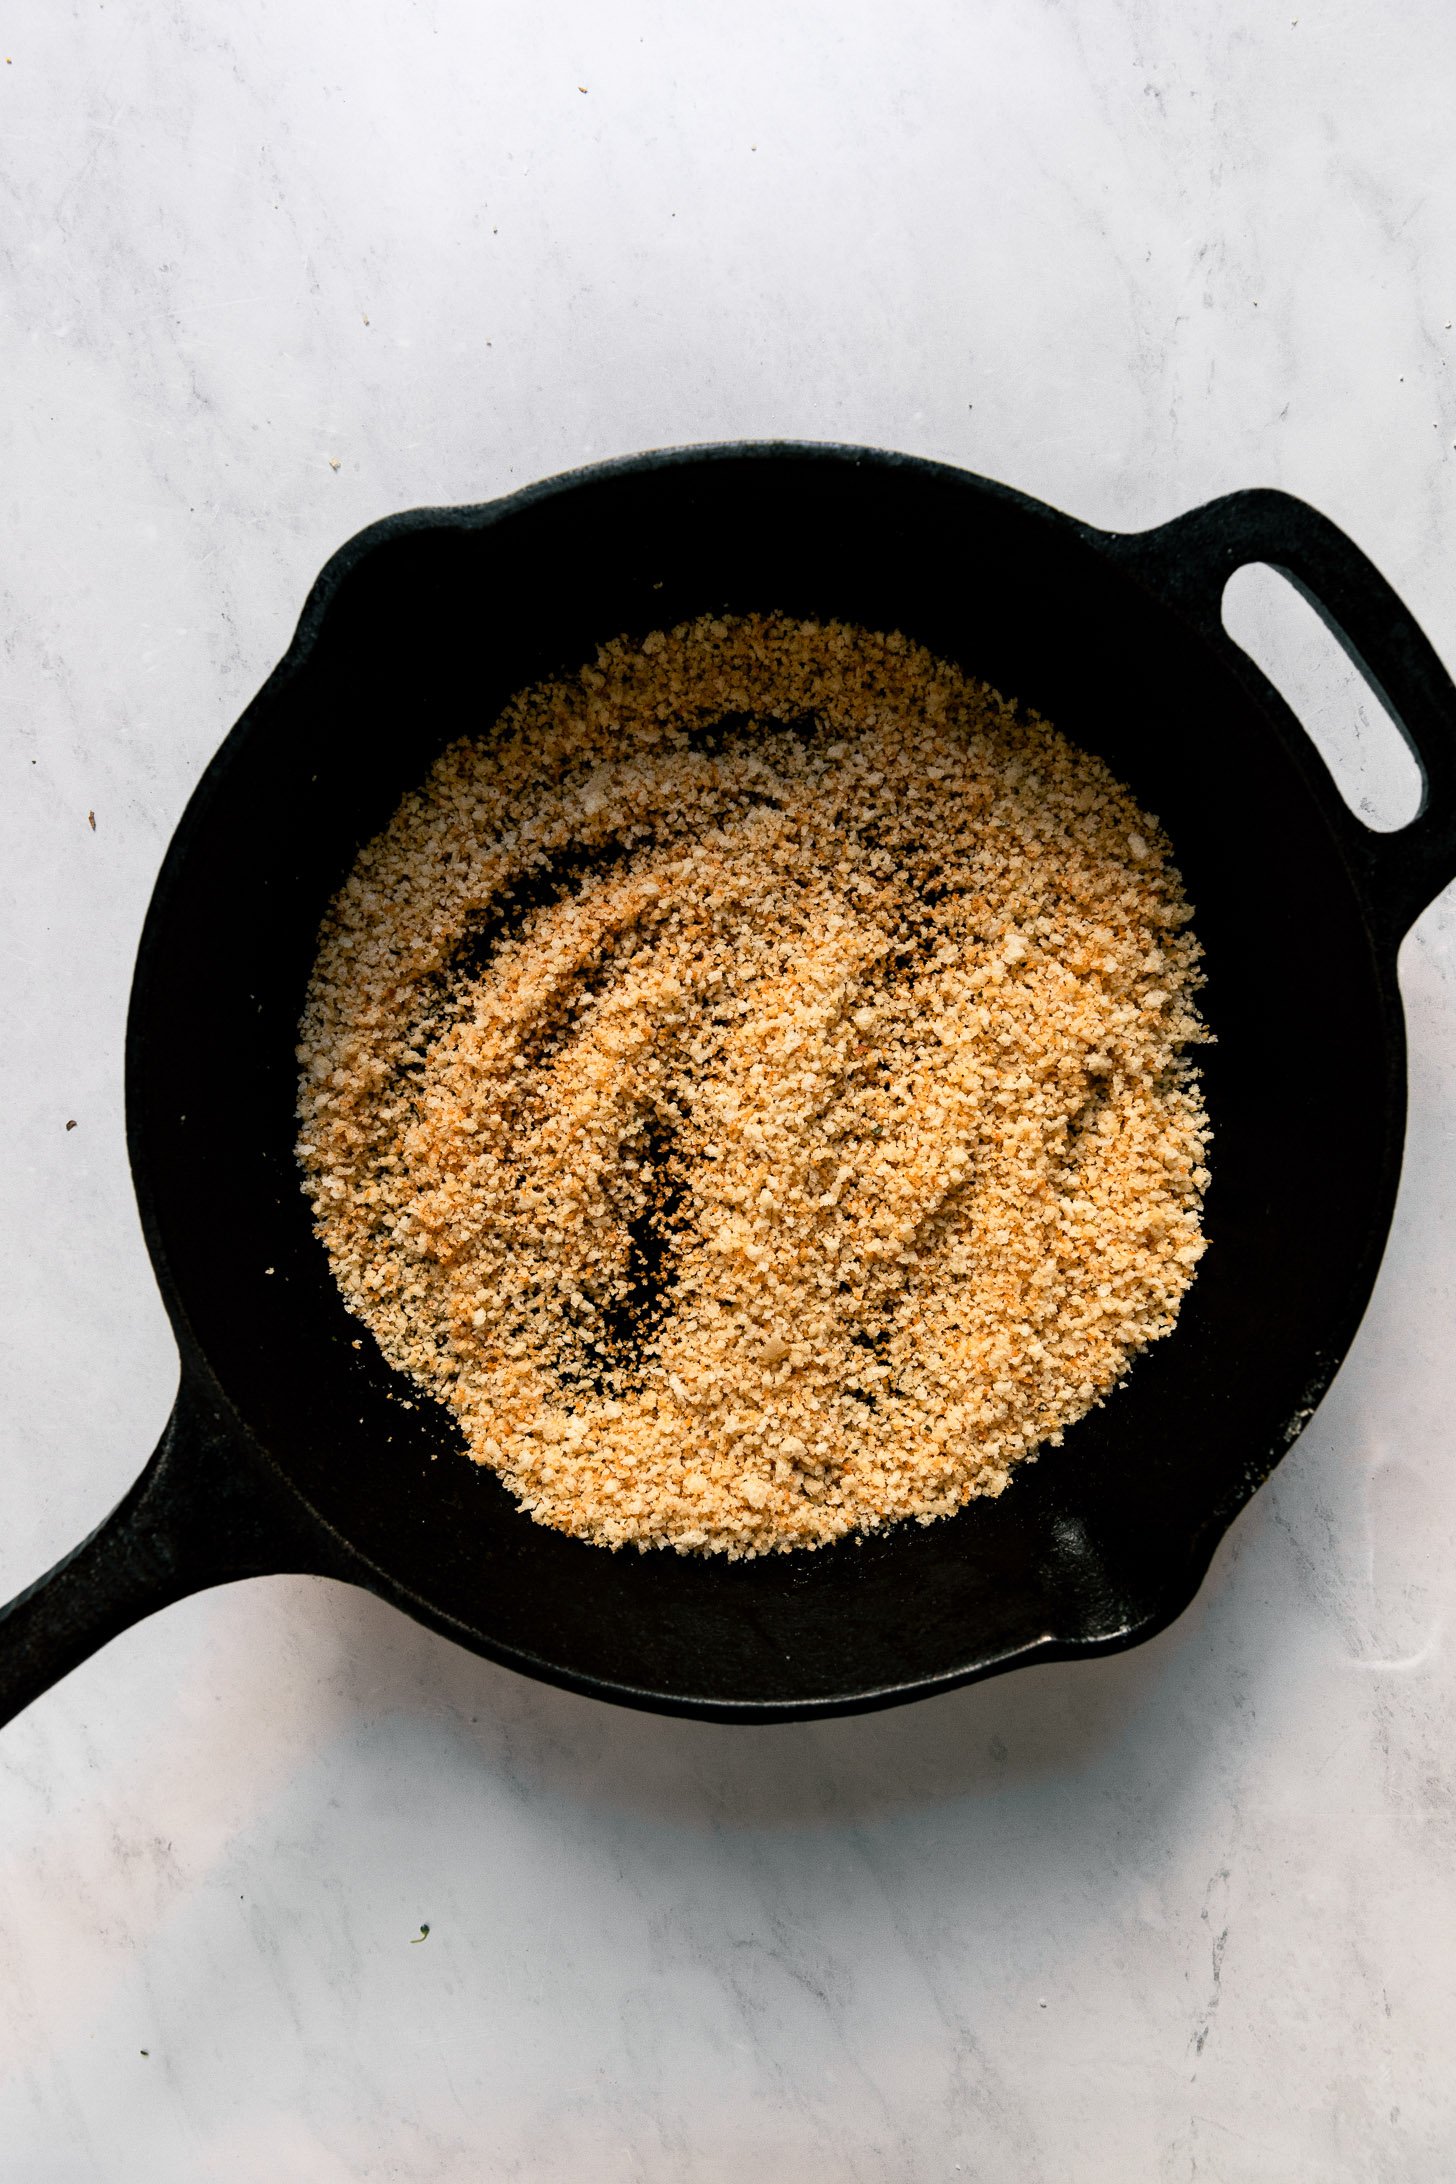 Skillet with panko after toasting.